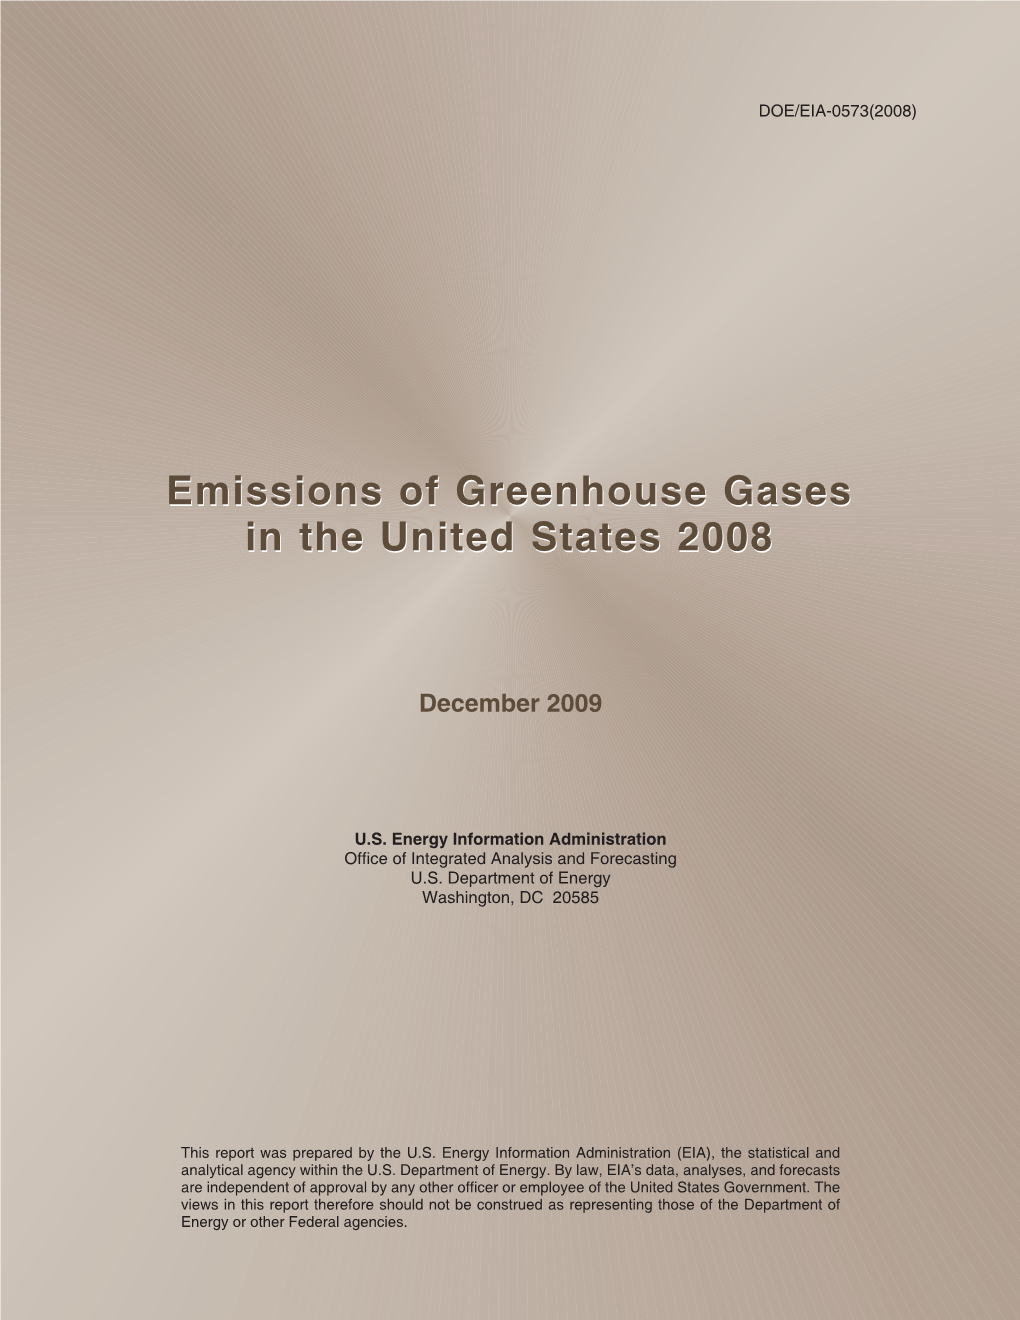 Emissions of Greenhouse Gases in the United States 2008